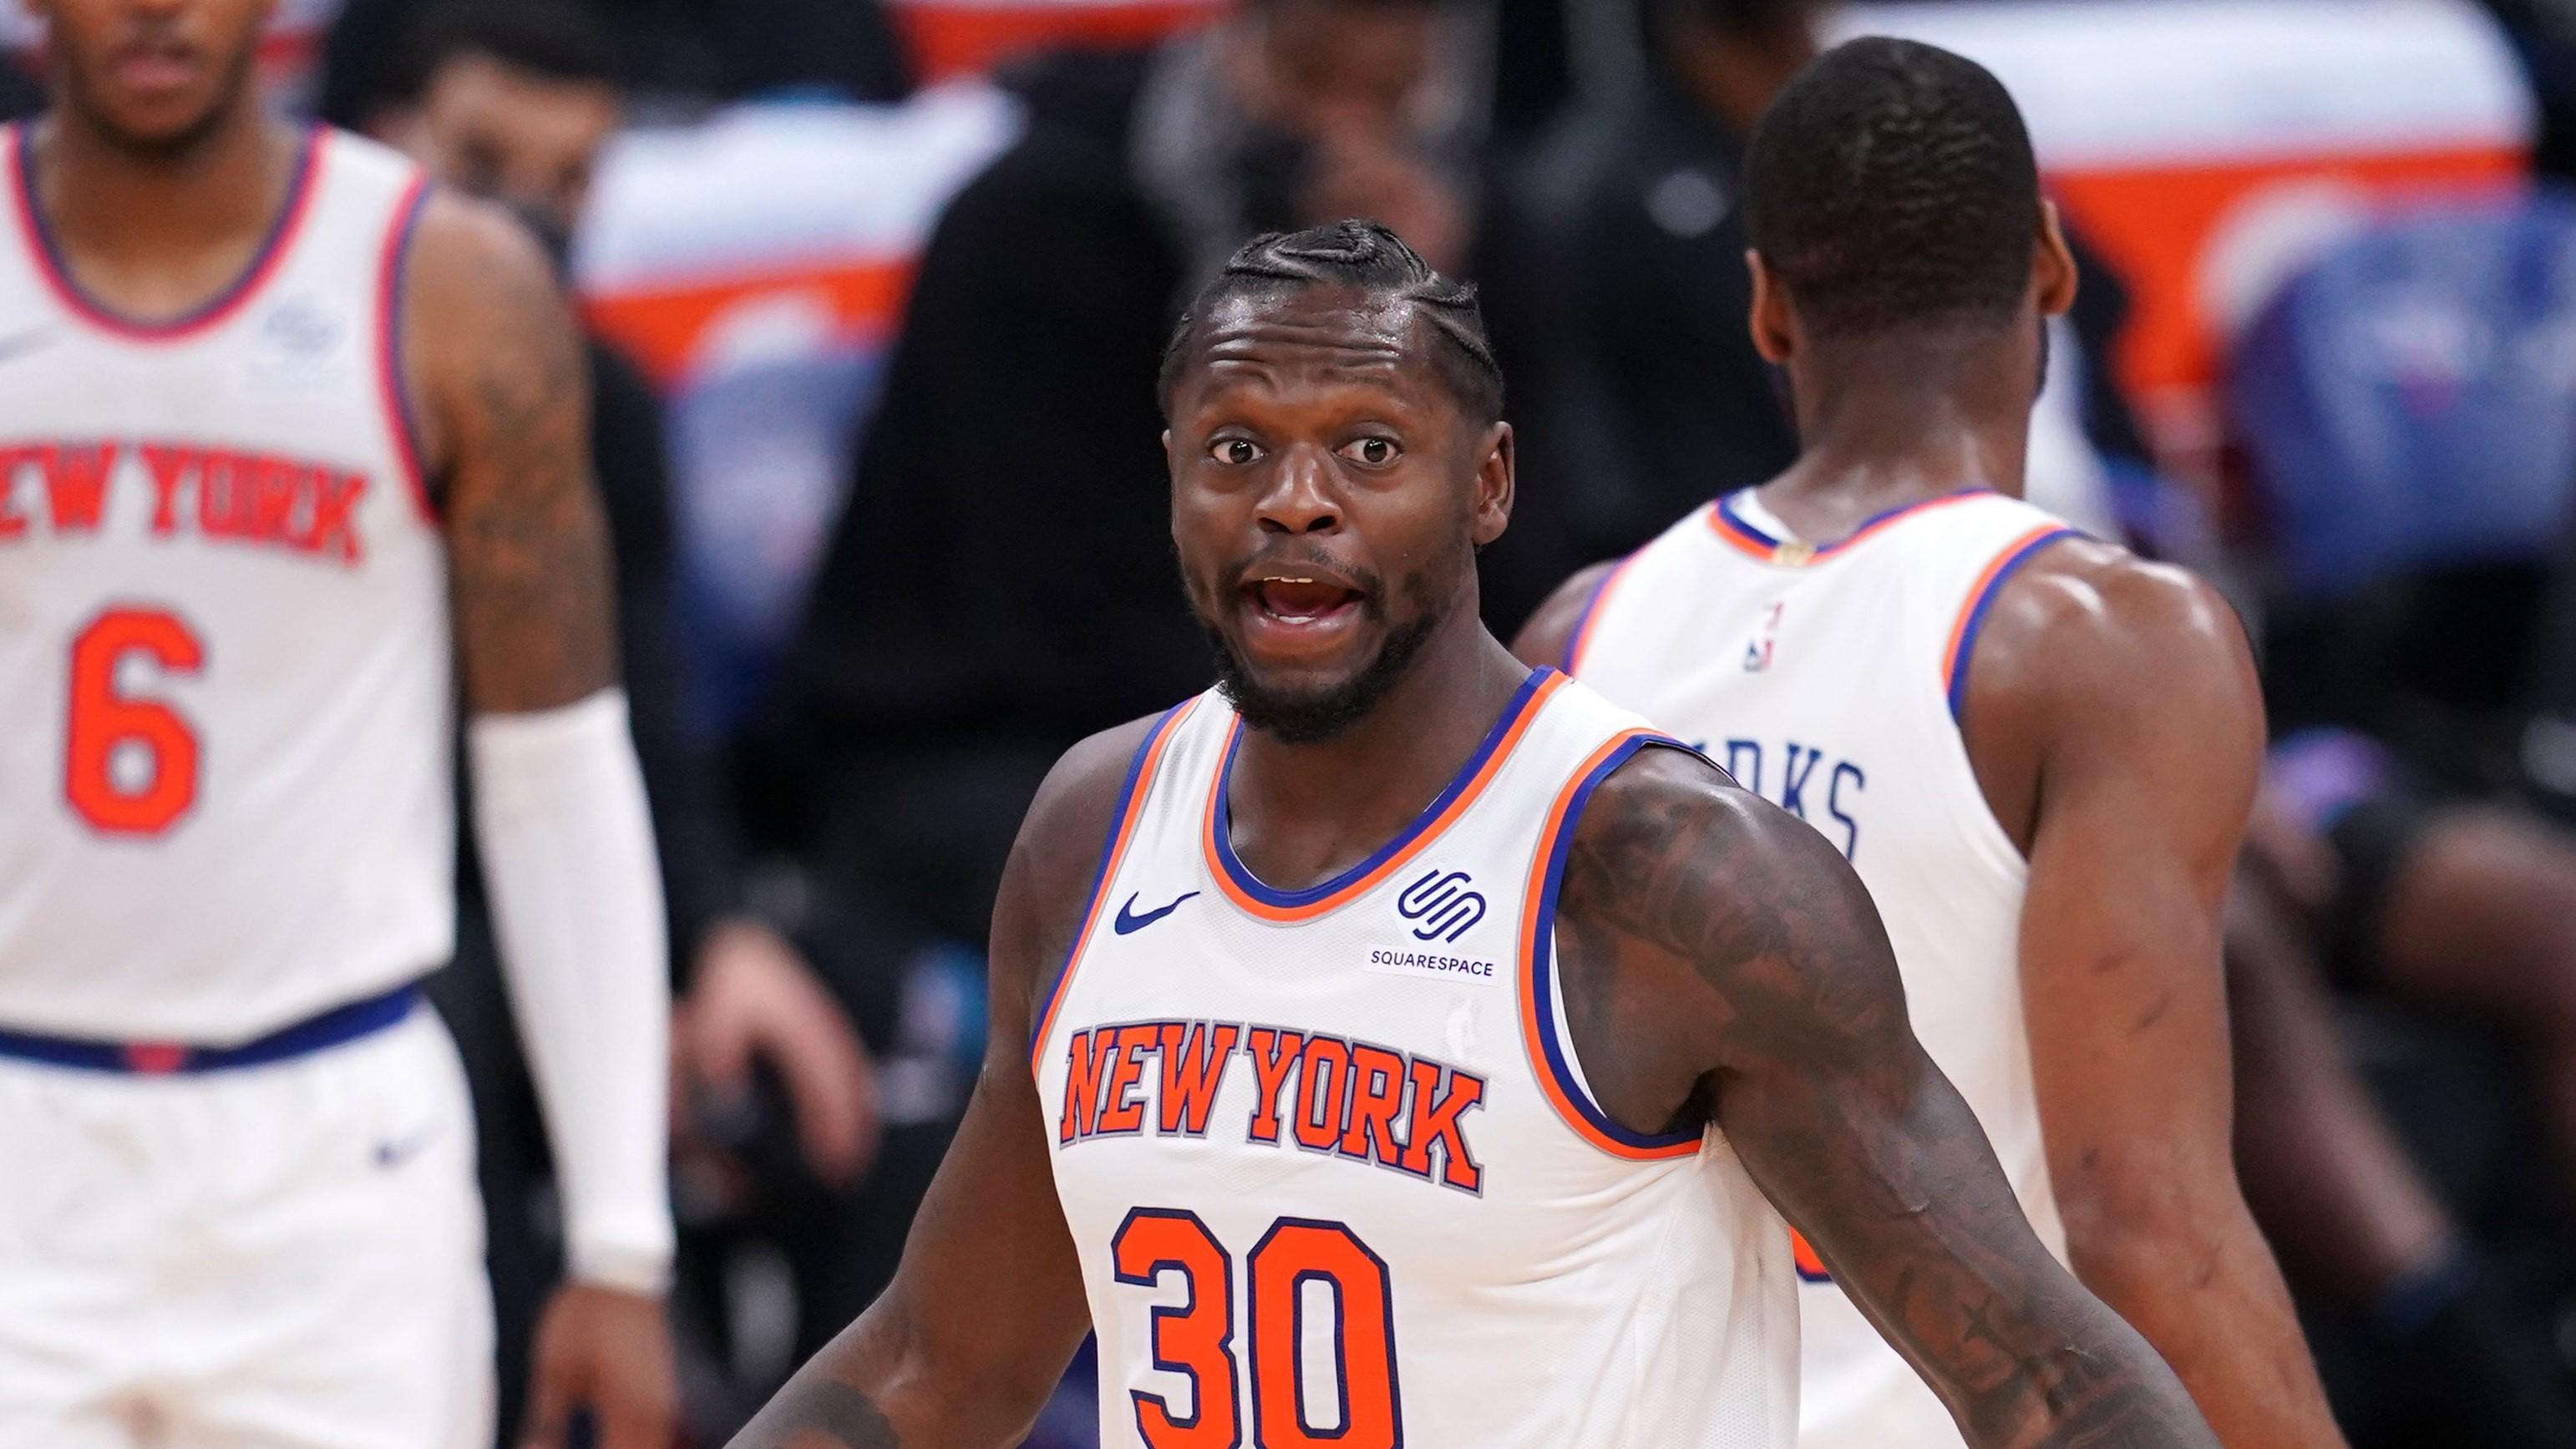 New York Knicks forward Julius Randle (30) reacts after making a basket while being fouled against the Sacramento Kings in the fourth quarter at the Golden 1 Center. / Cary Edmondson